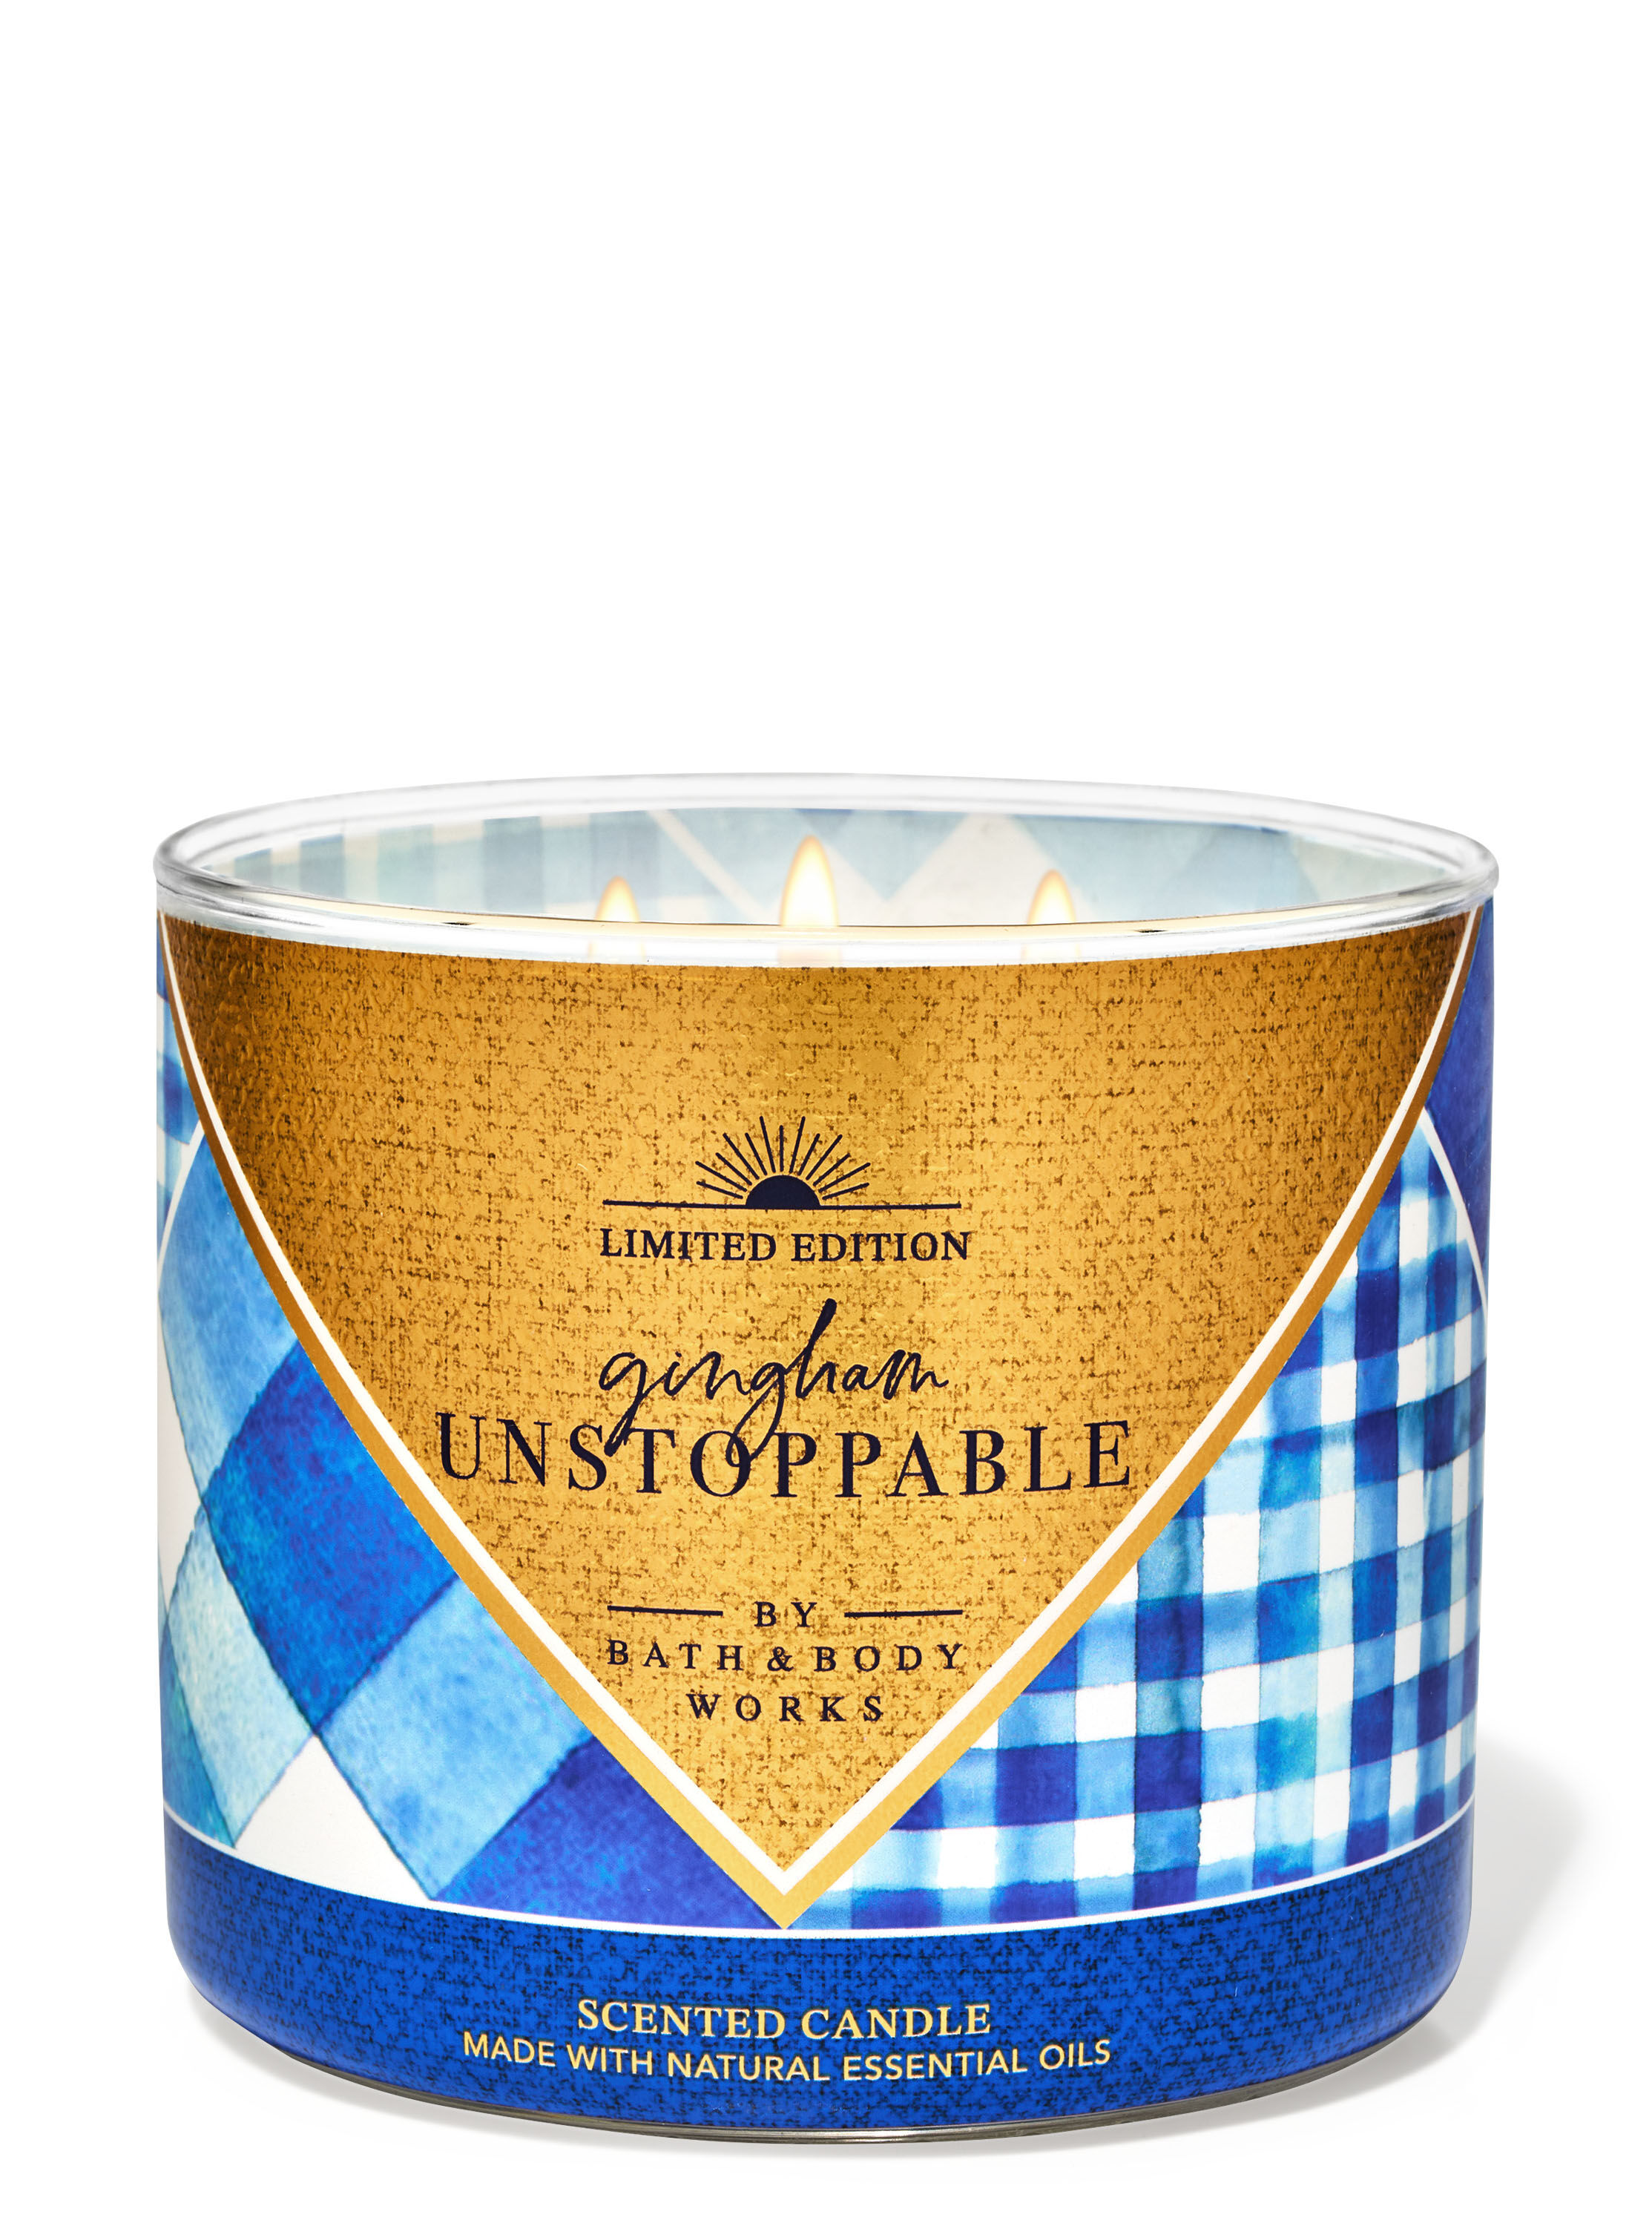 Gingham Unstoppable 3-Wick Candle